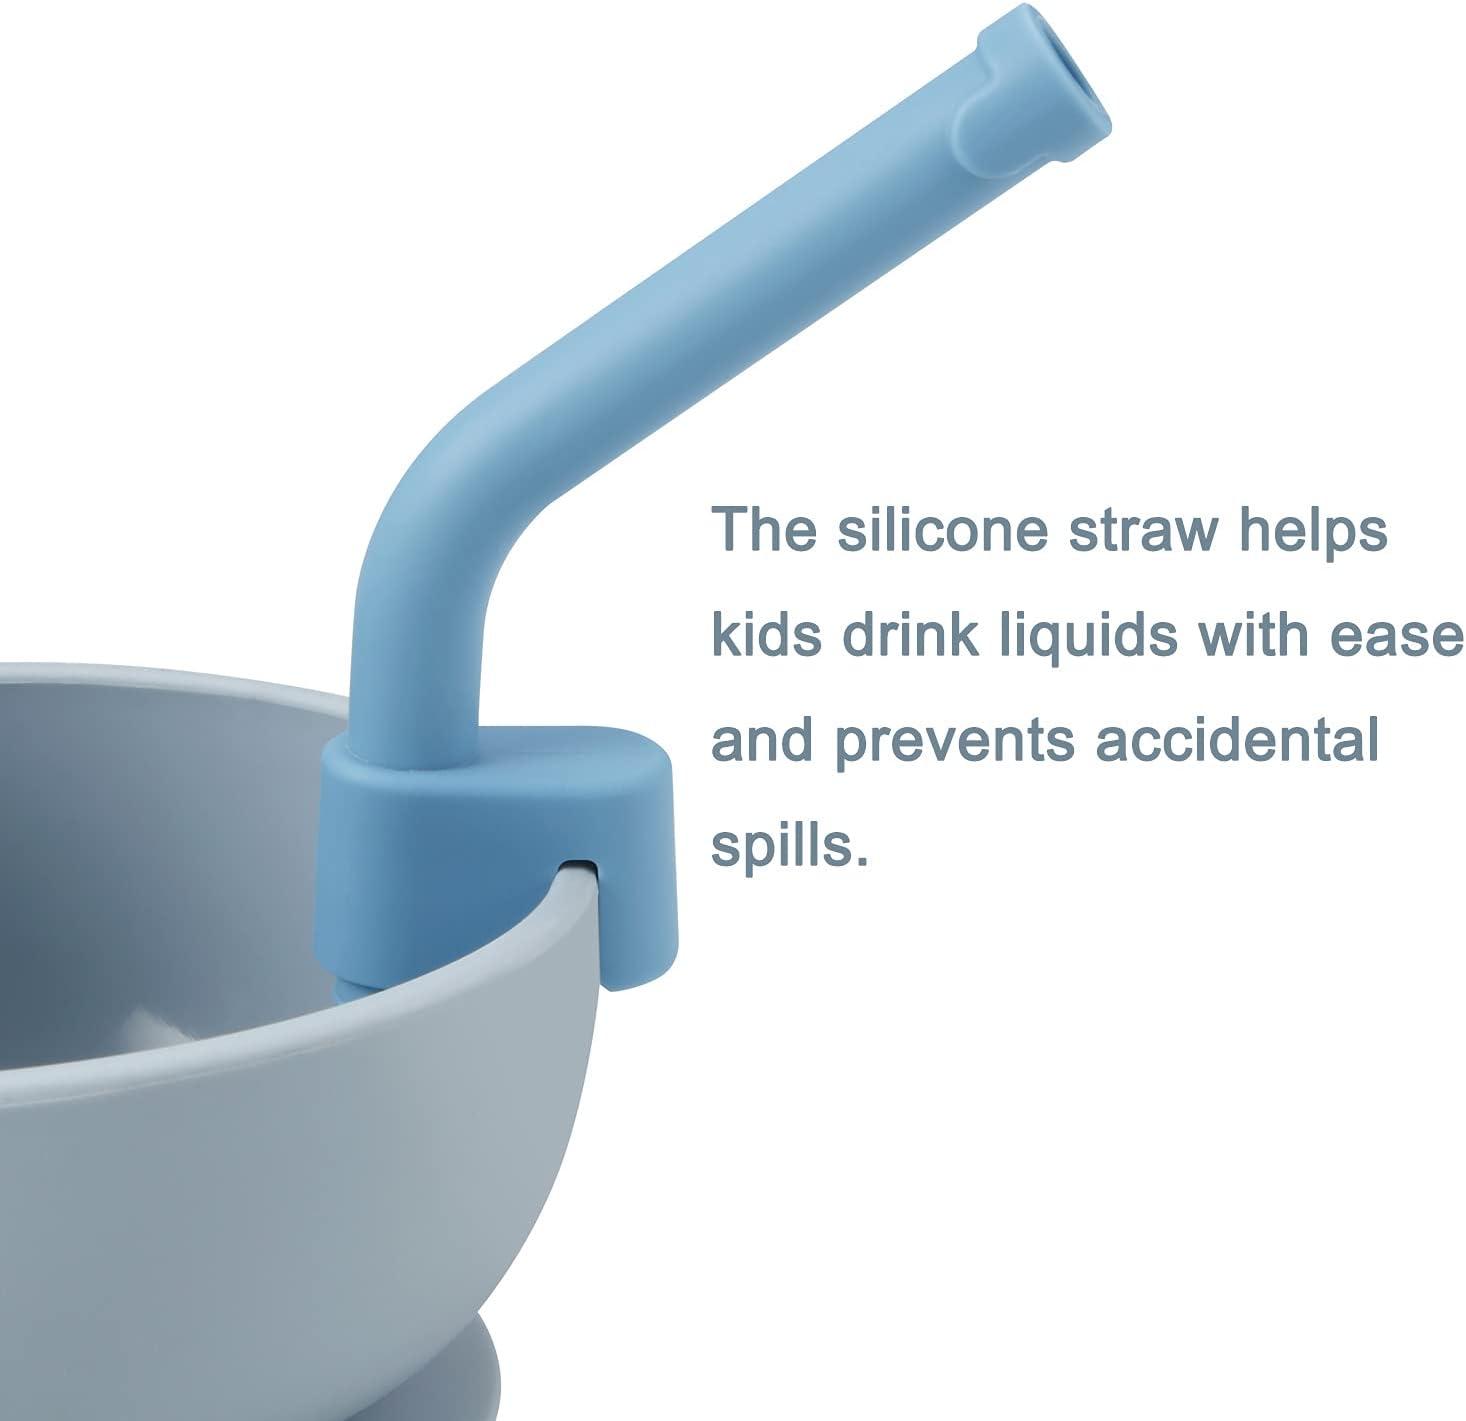 Straw Silicone Tips (Pack of 2)